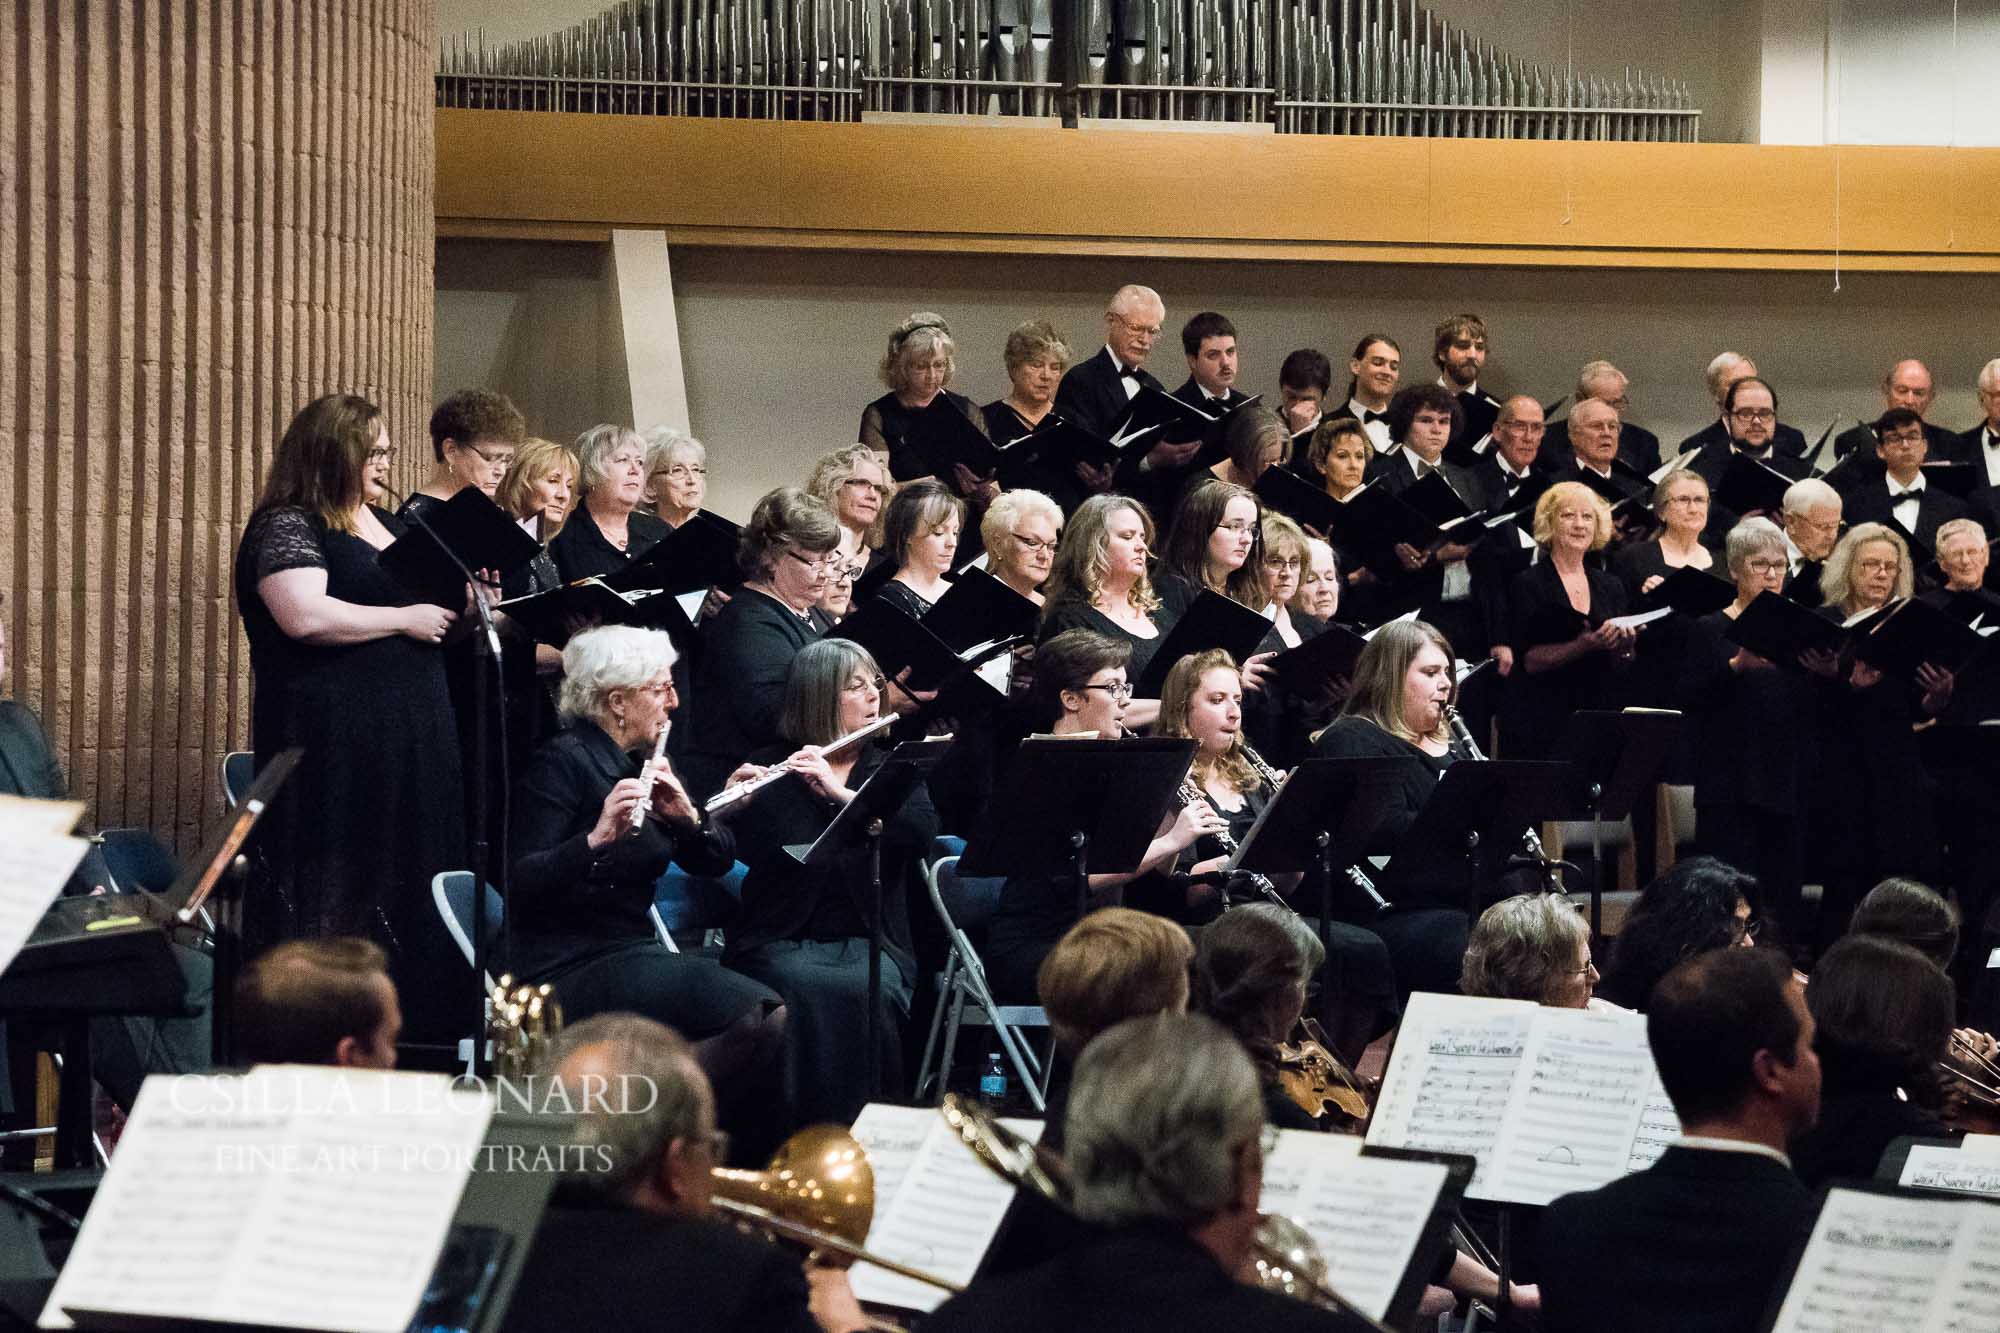 Grand junction photographer shows images of Good Friday concert (63)